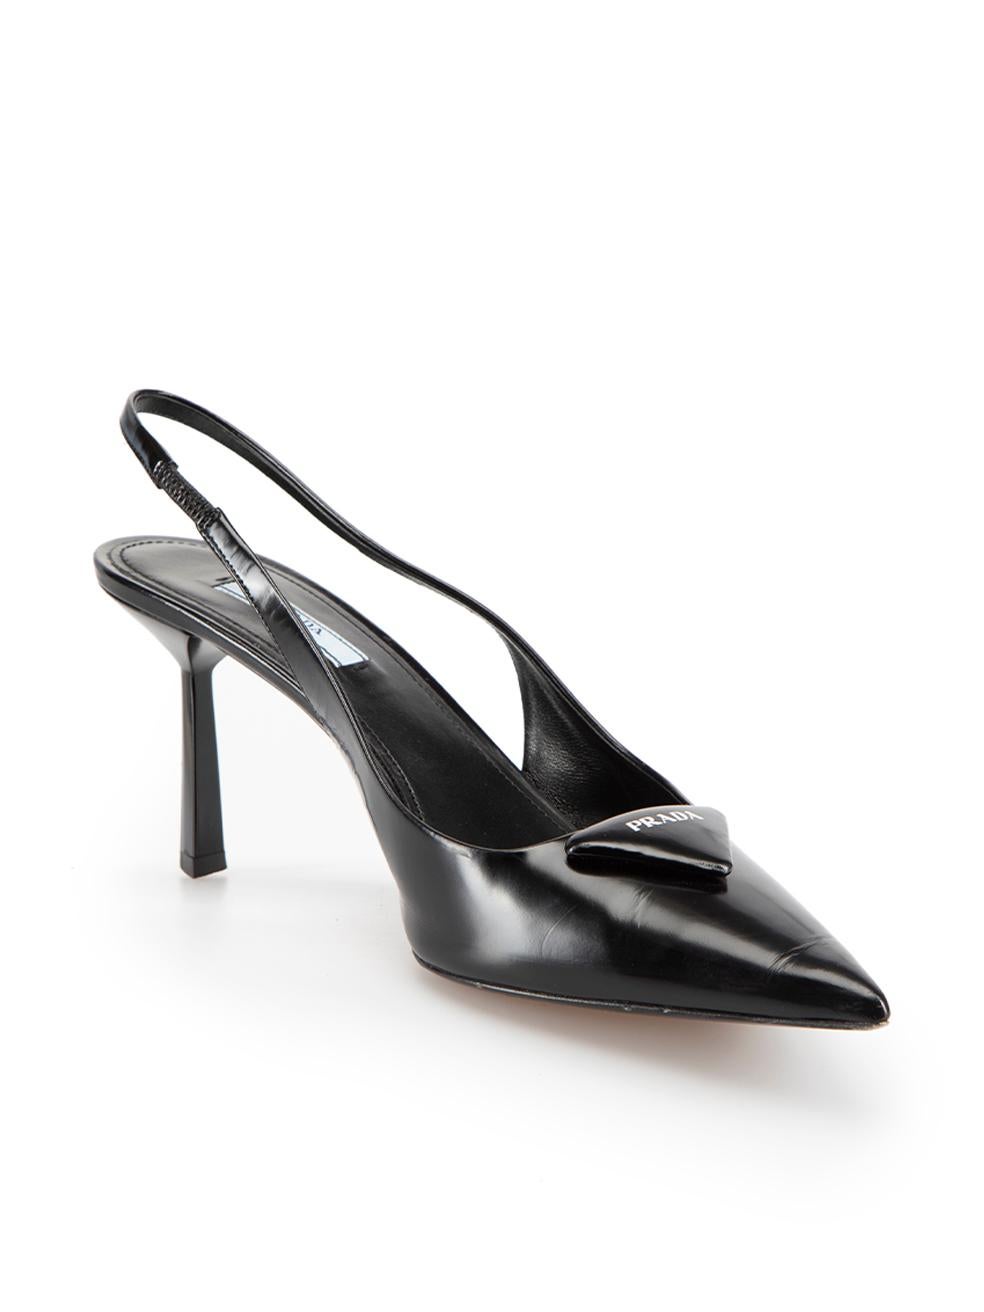 CONDITION is Very Good. Minimal wear to shoes is evident. Minimal wear to upper with creasing at the toe as well as noticeable scuffing on the soles of this used Prada designer resale item.



Details


Black

Leather

Heels

Point-toe

Mid